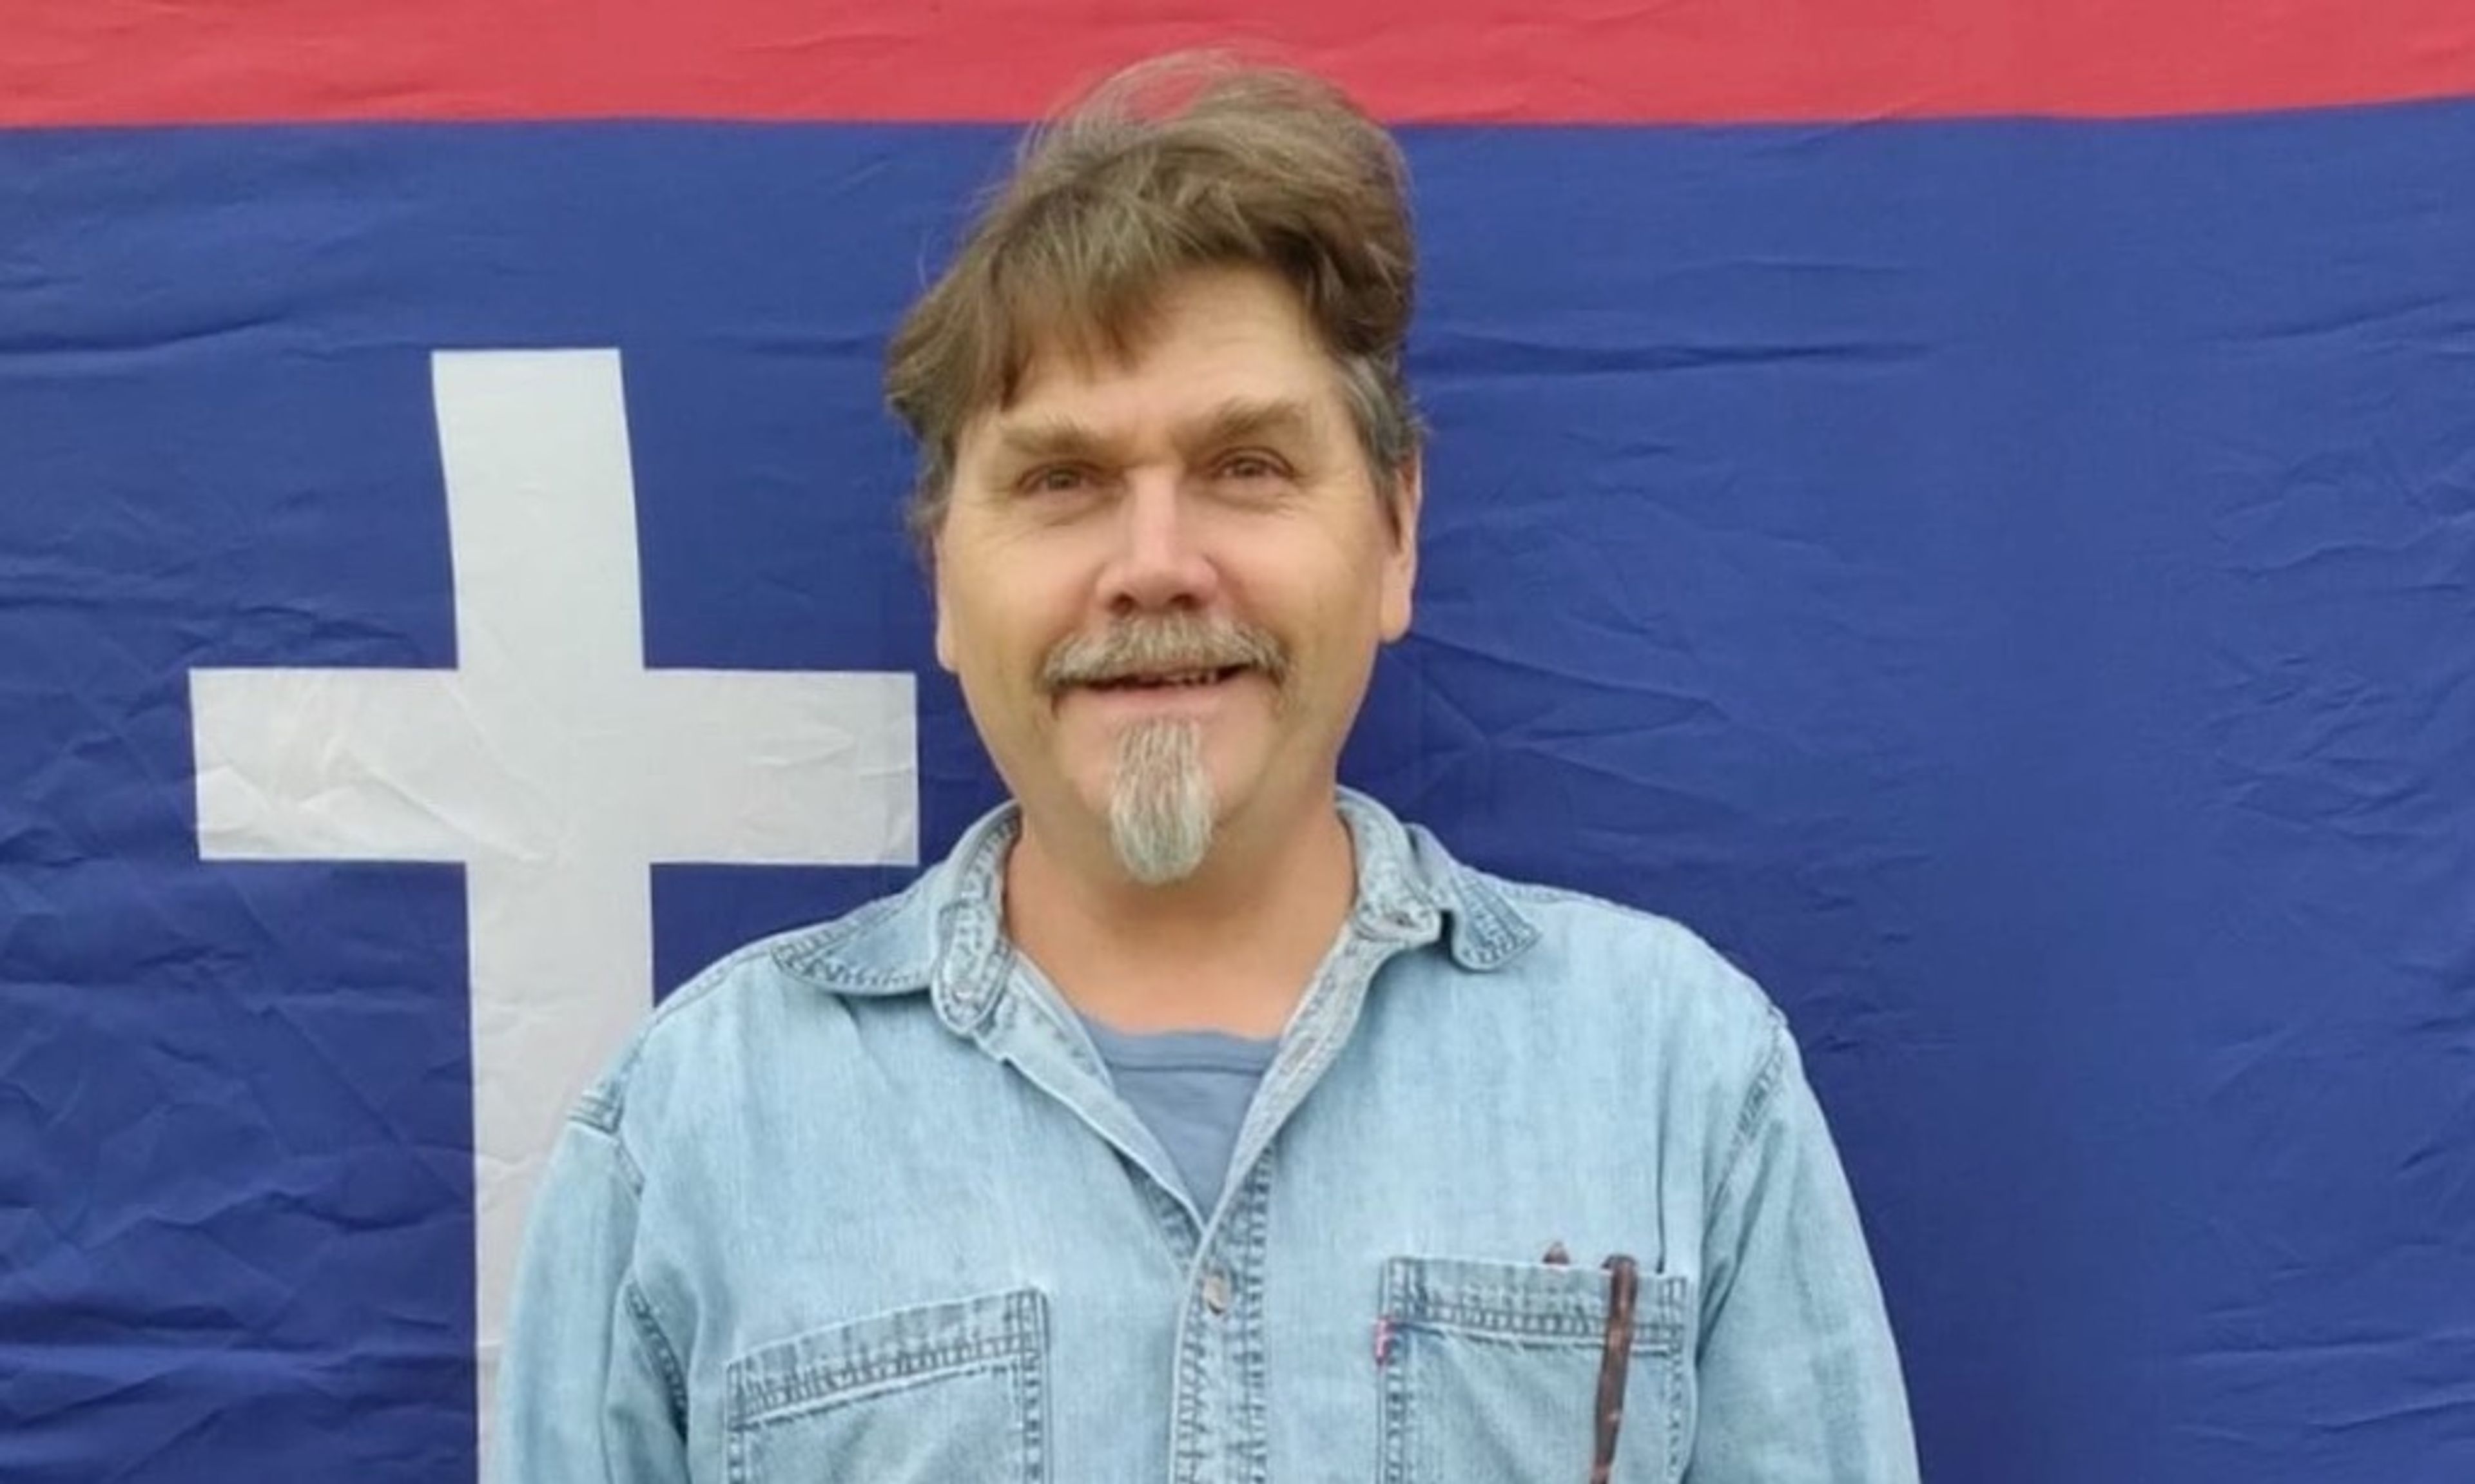 Darrell McClanahan of Milo, a candidate for governor who the Missouri Republican Party attempted to remove from the ballot for being an ‘honorary’ KKK member. He is shown in a photo from his 2022 campaign for U.S. Senate, standing in front of the flag of the Missouri State Guard, a military force formed in 1861 to oppose the Union in the Civil War.